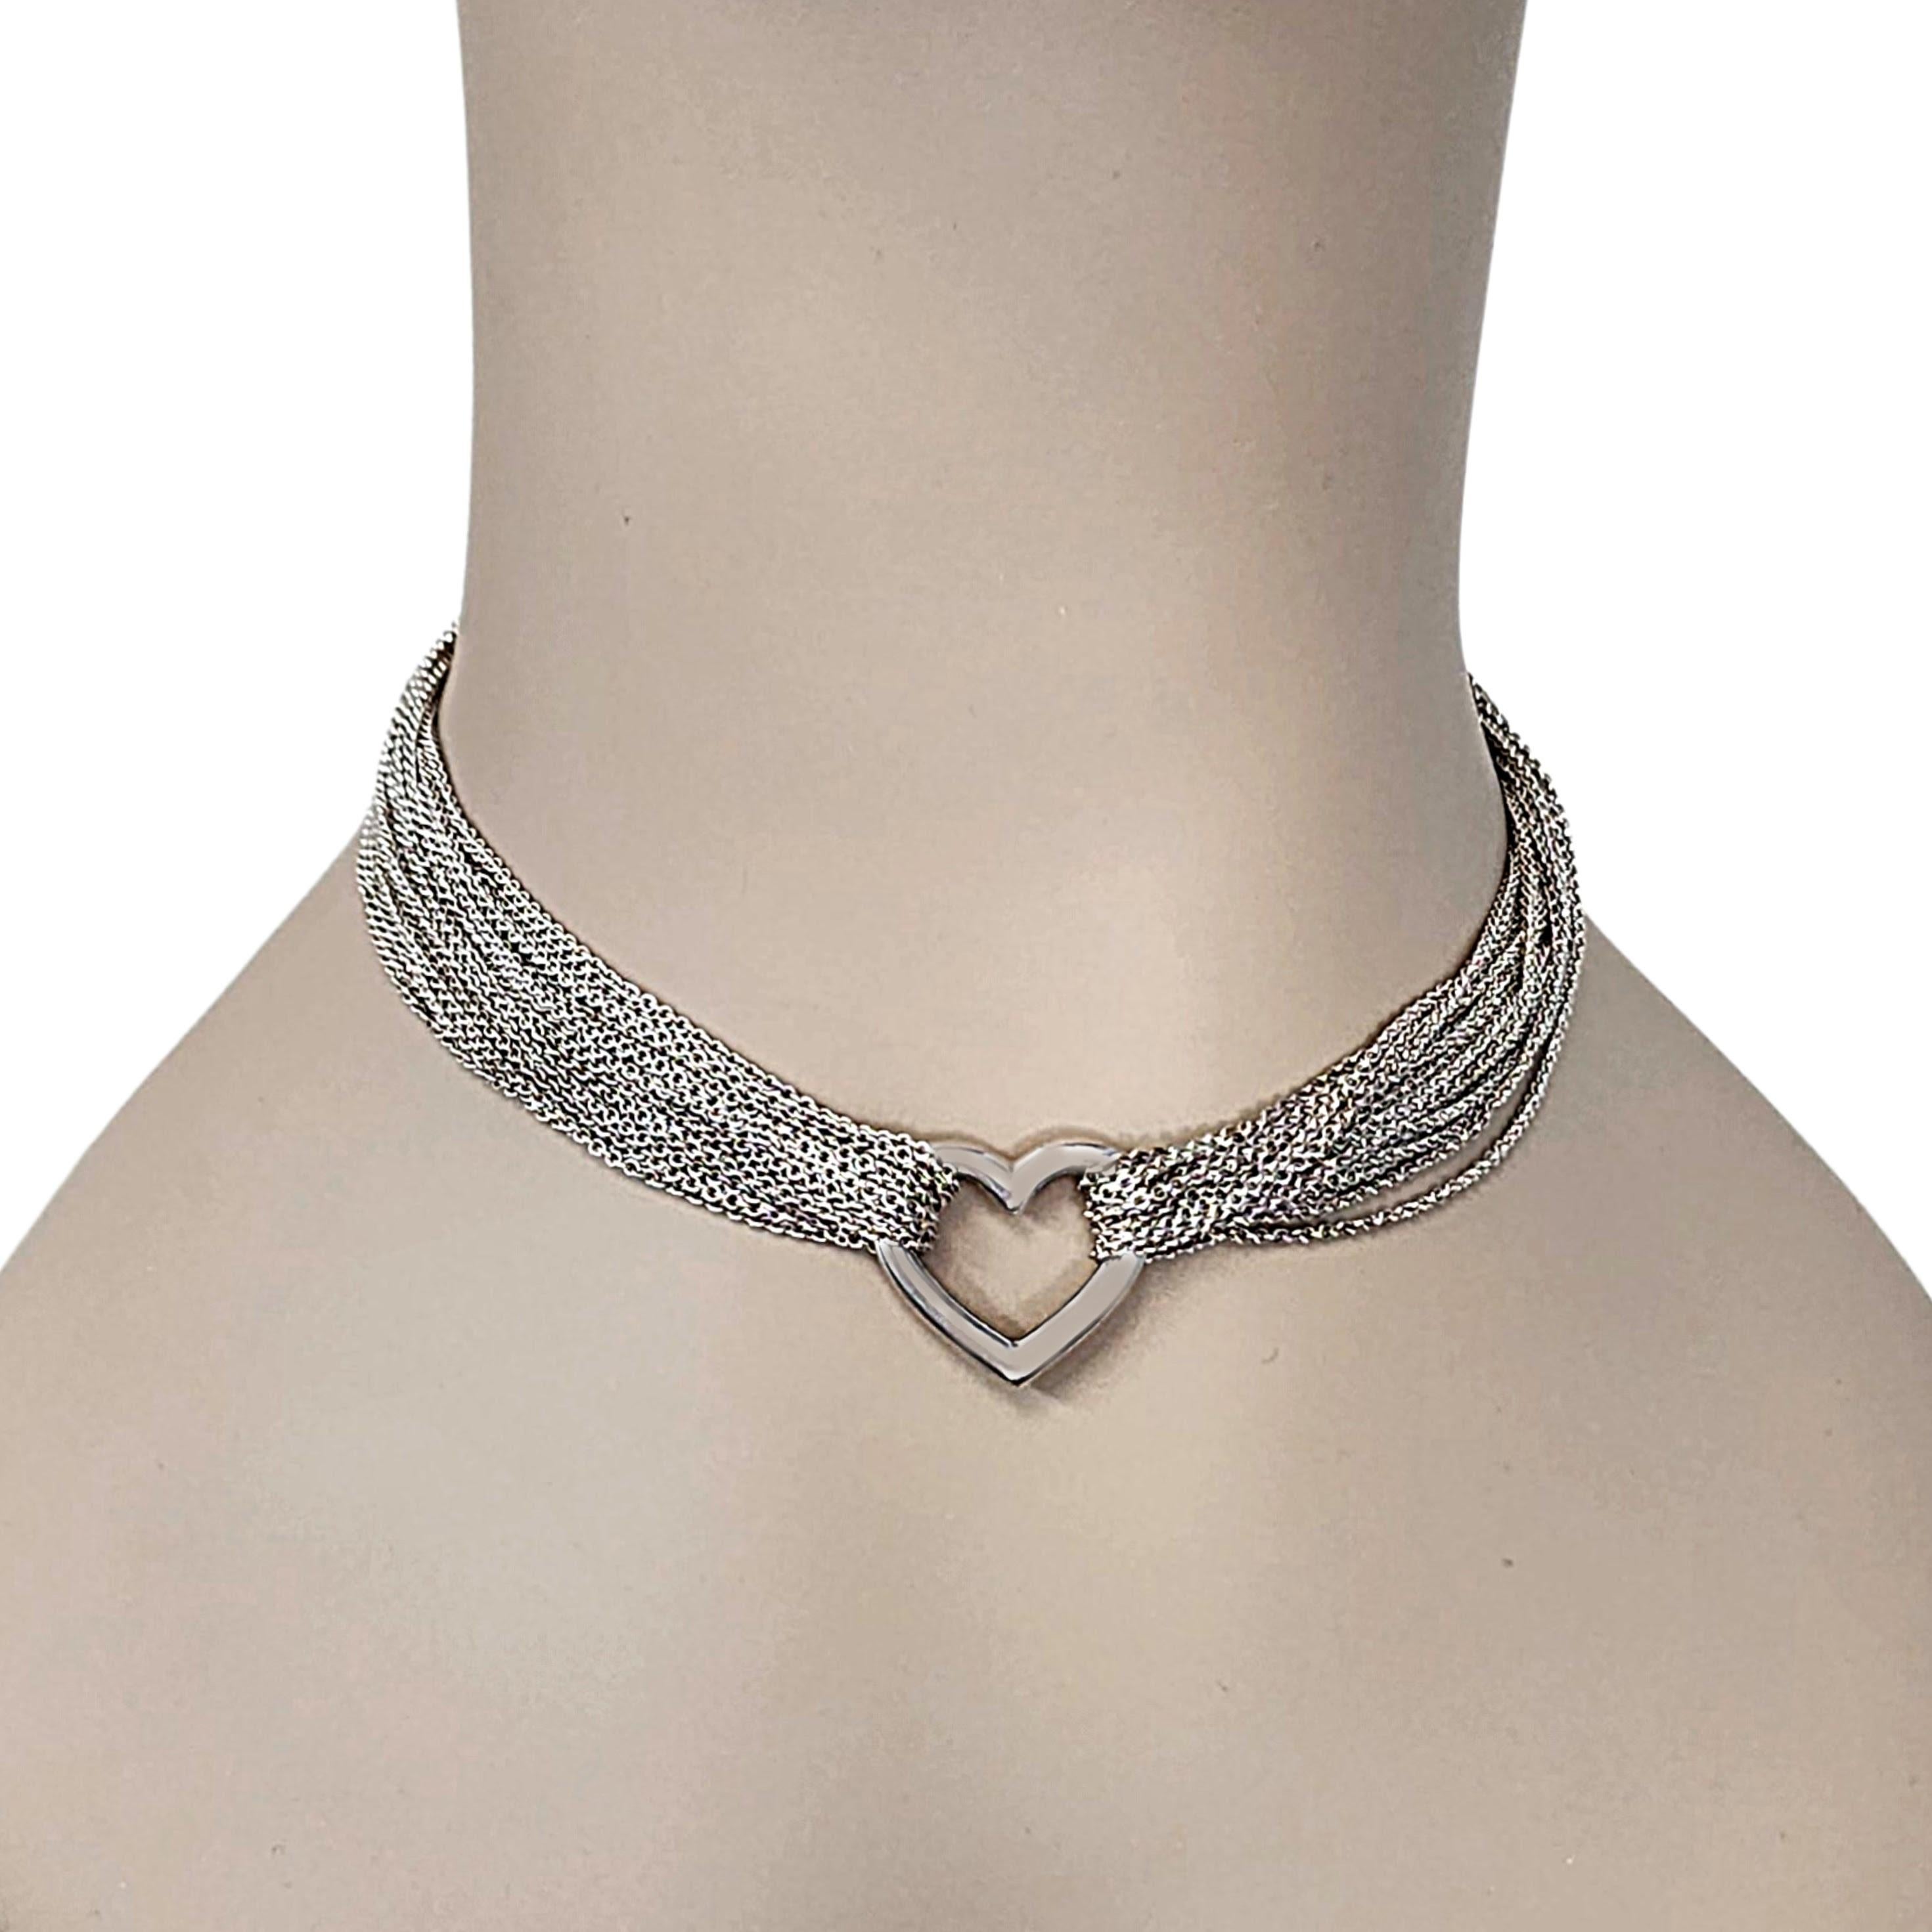 Tiffany & Co sterling silver open heart multi-strand necklace with toggle closure, with box and pouch.

This lovely open heart necklace by Tiffany & Co features multi strand chains with a classic toggle closure. Includes Tiffany & Co box and